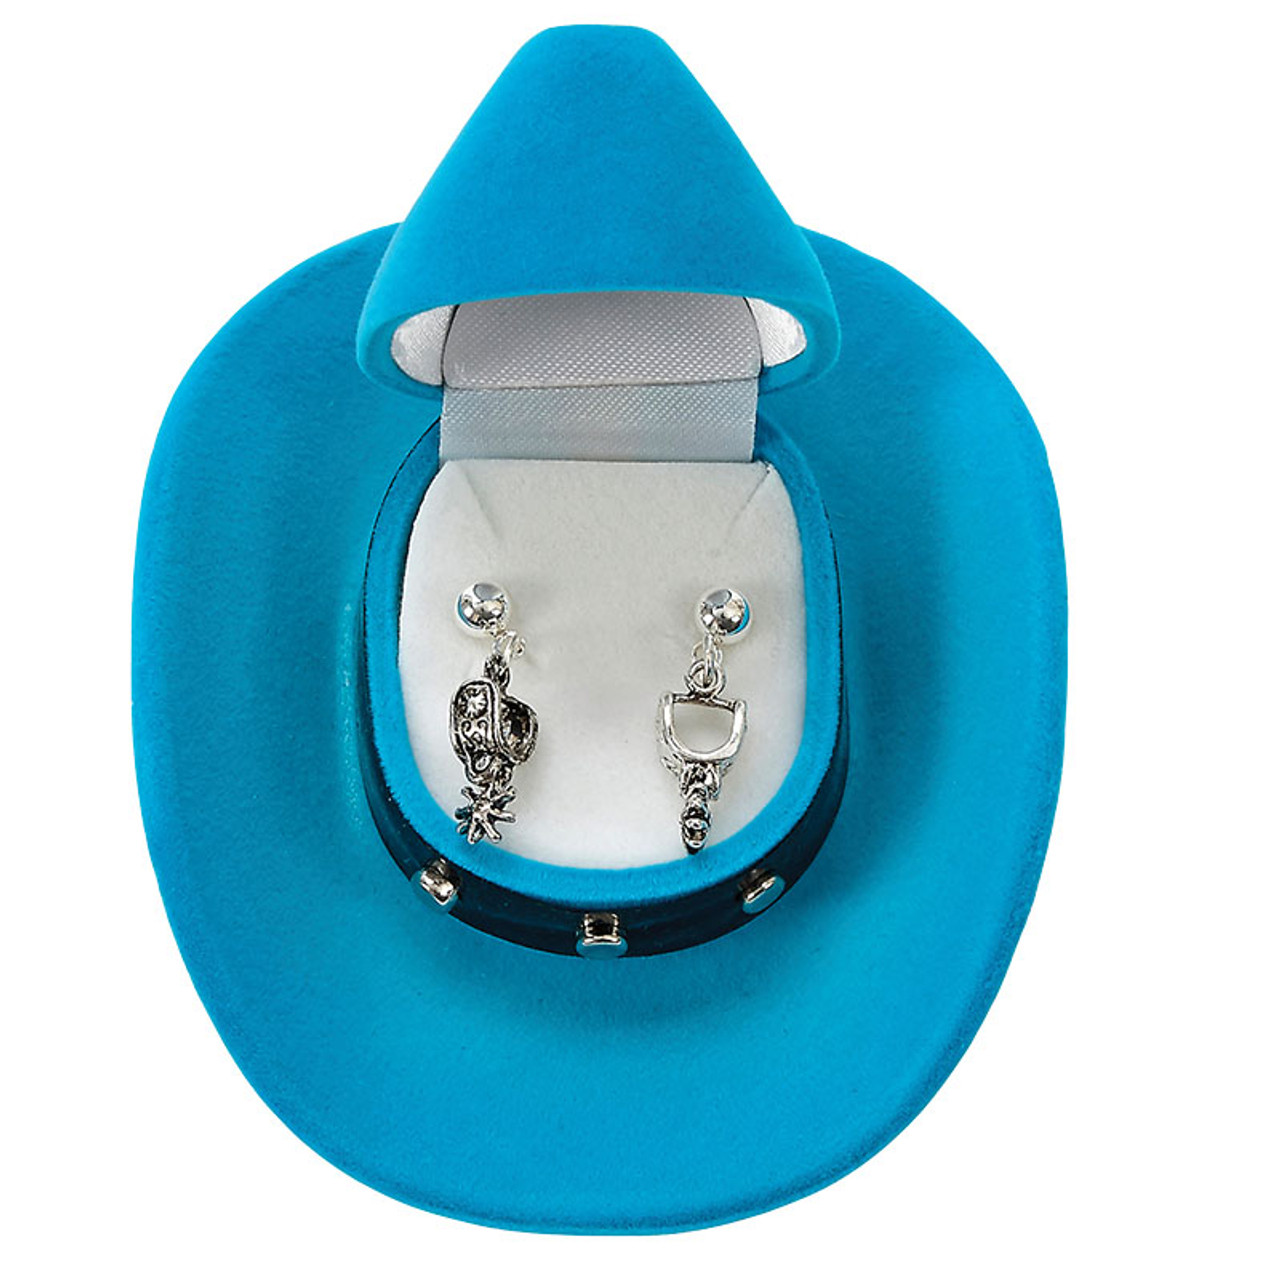 Spur Earrings in Cowboy Hat Gift Box - Western Express